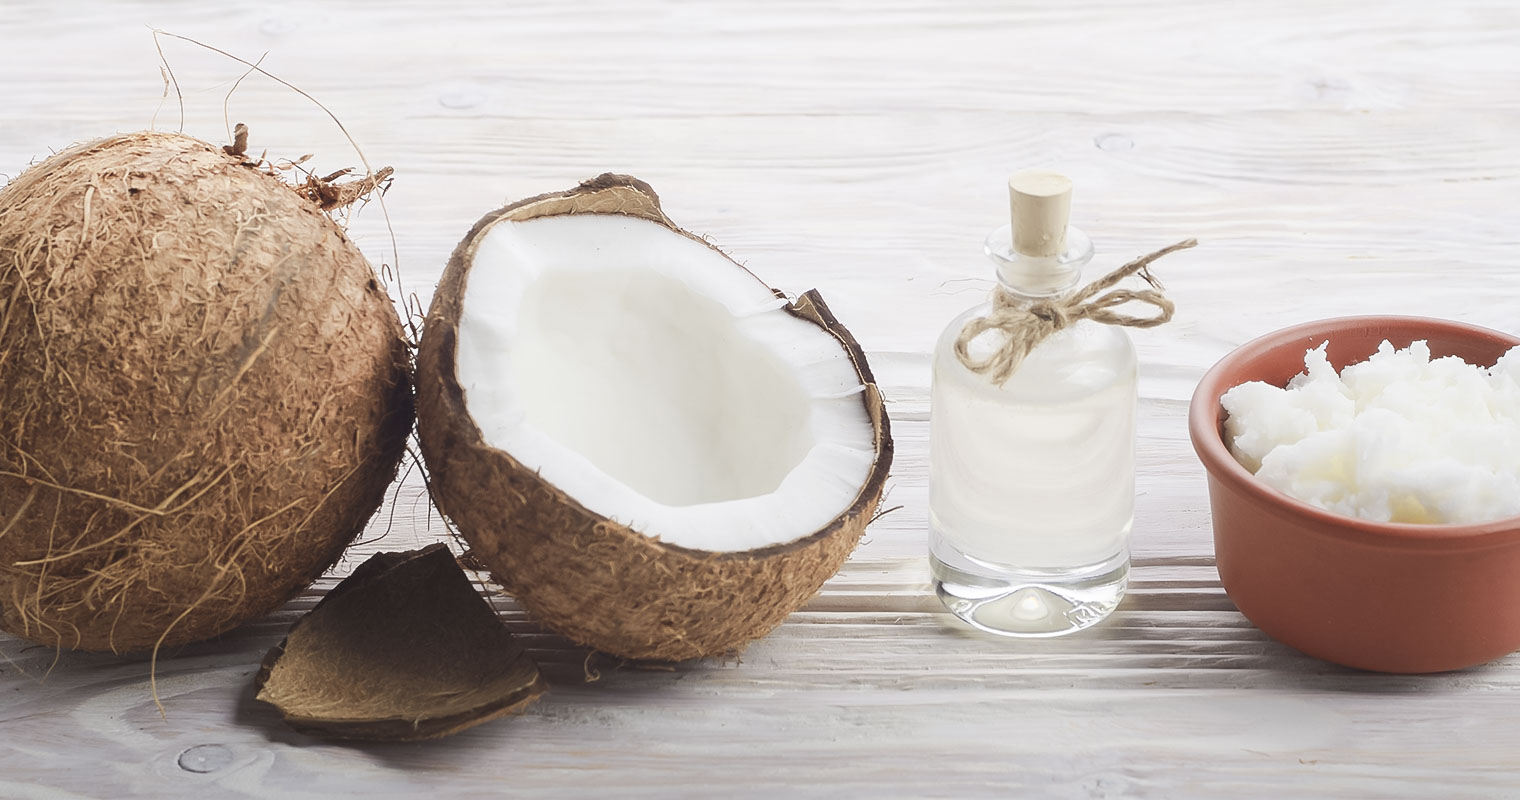 An opened coconut with a bottle of coconut oil and a bowl of coconut meat